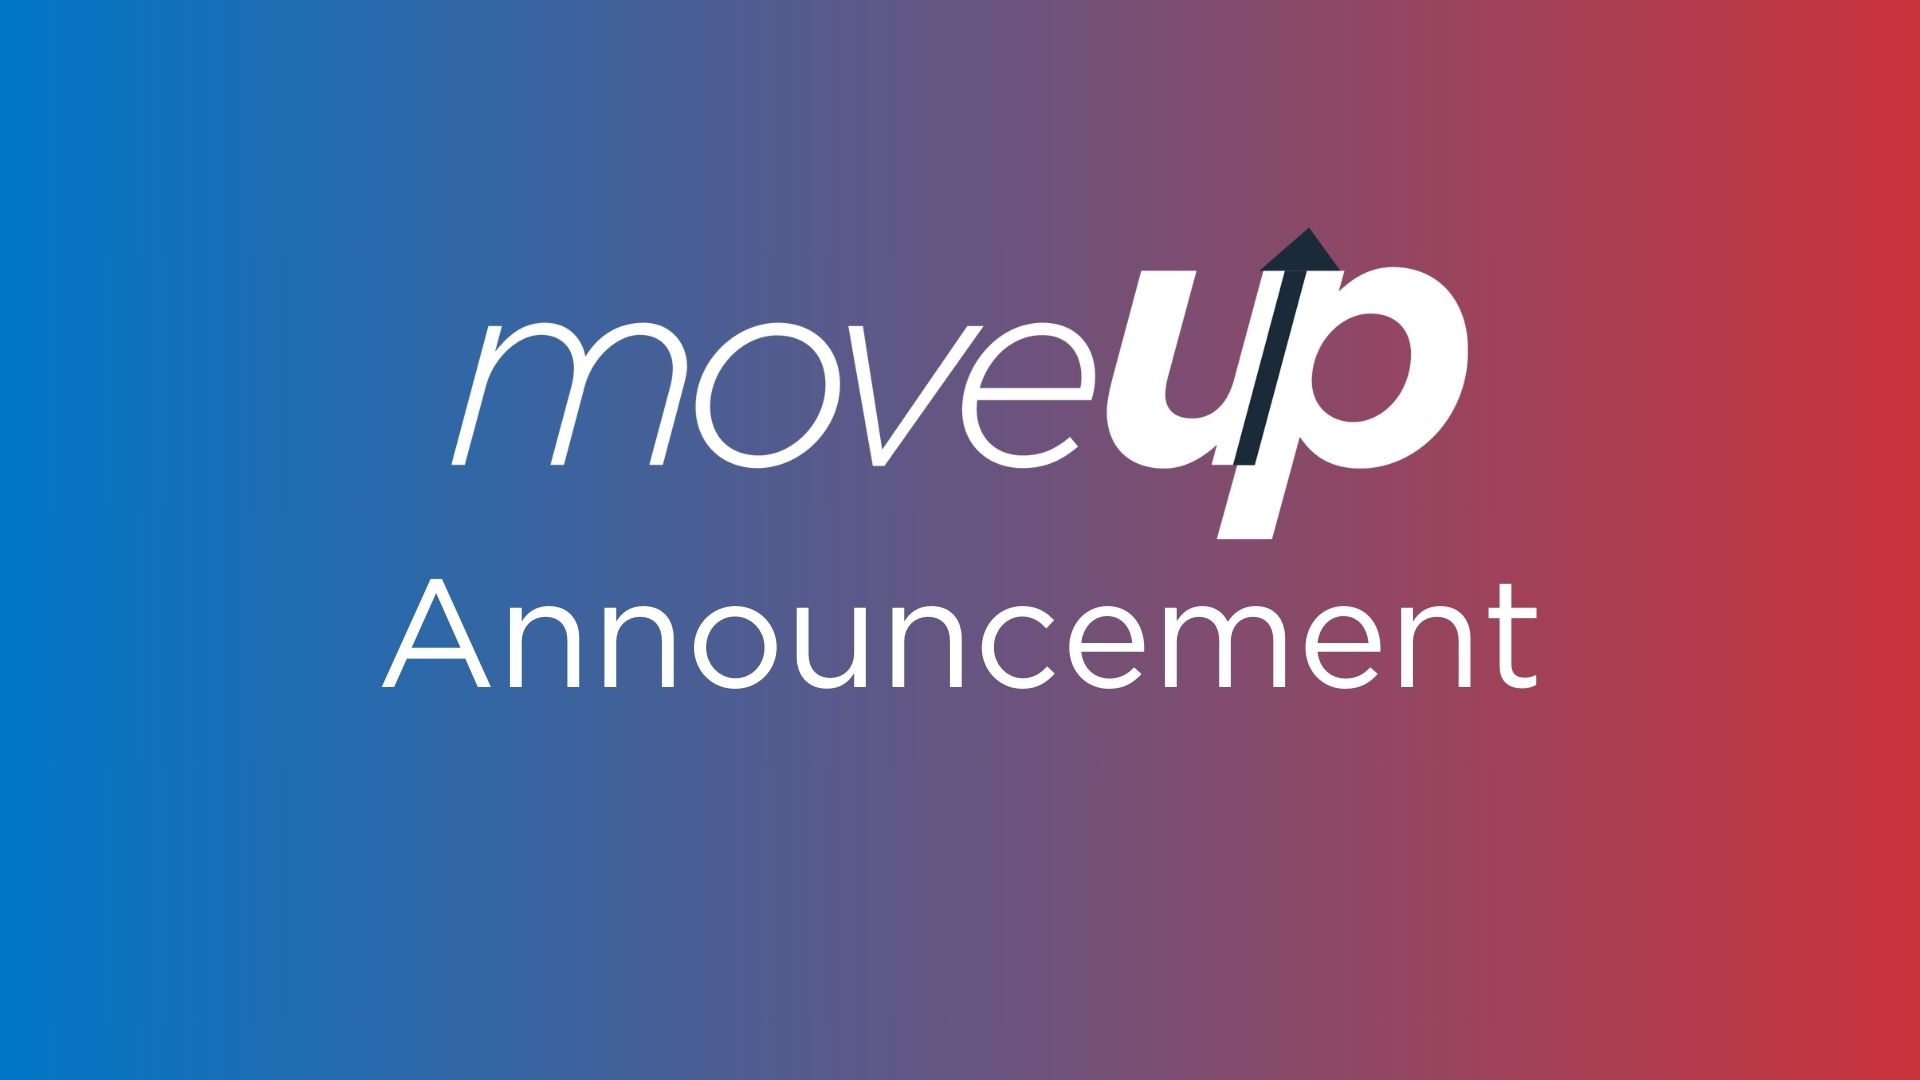 MoveUP announcement